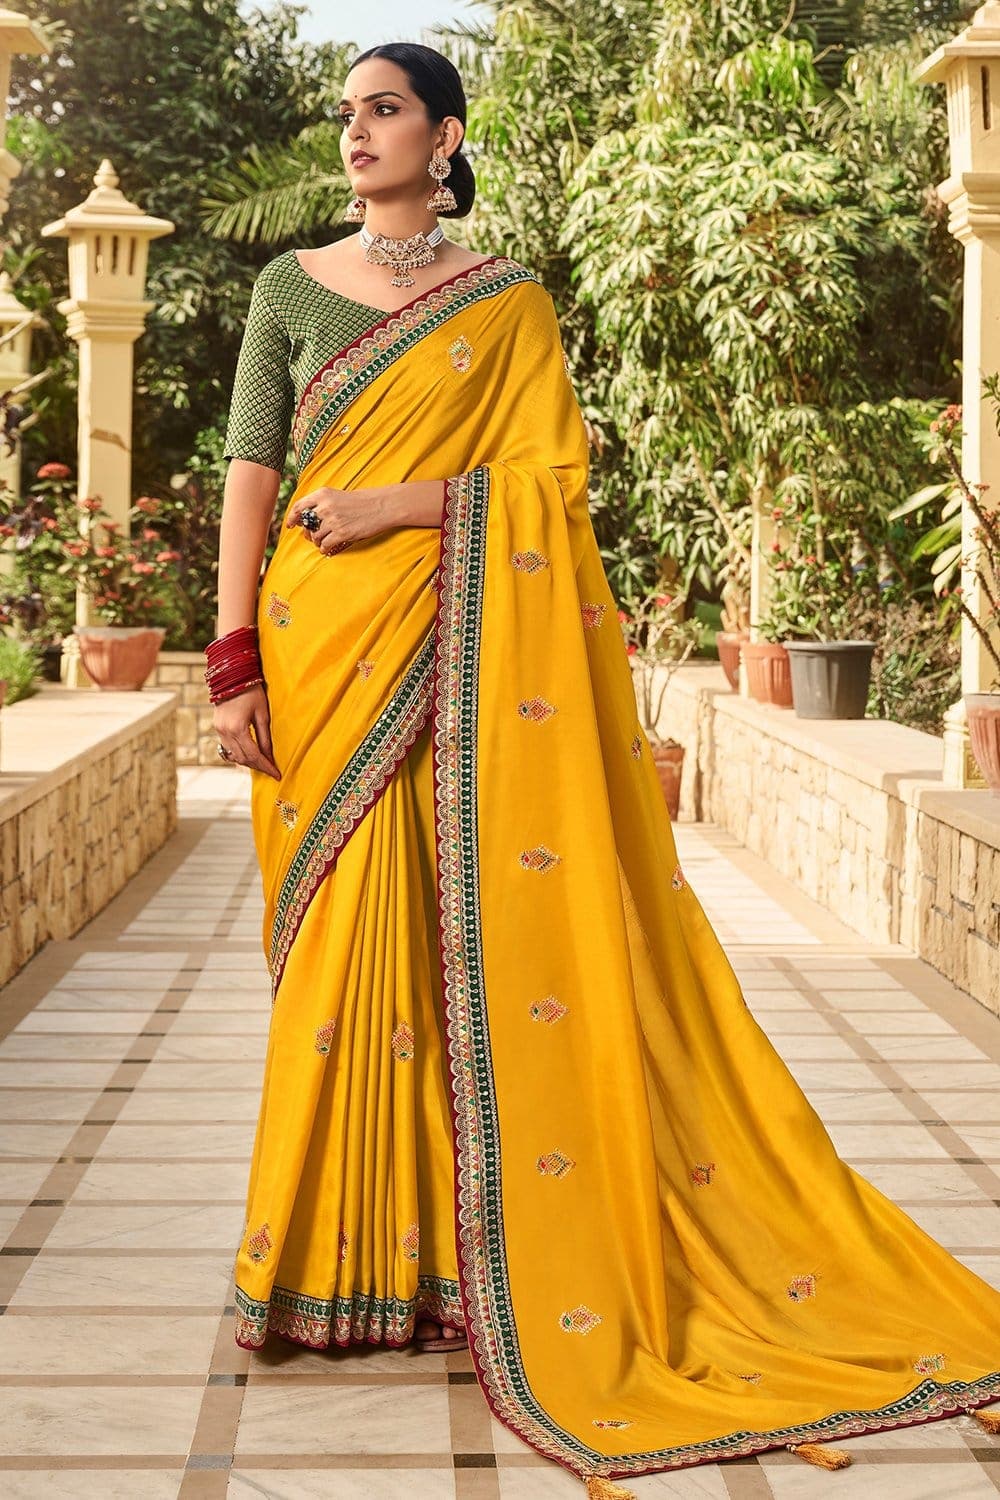 15+ Fashionable Shades of Yellow Sarees for Sale